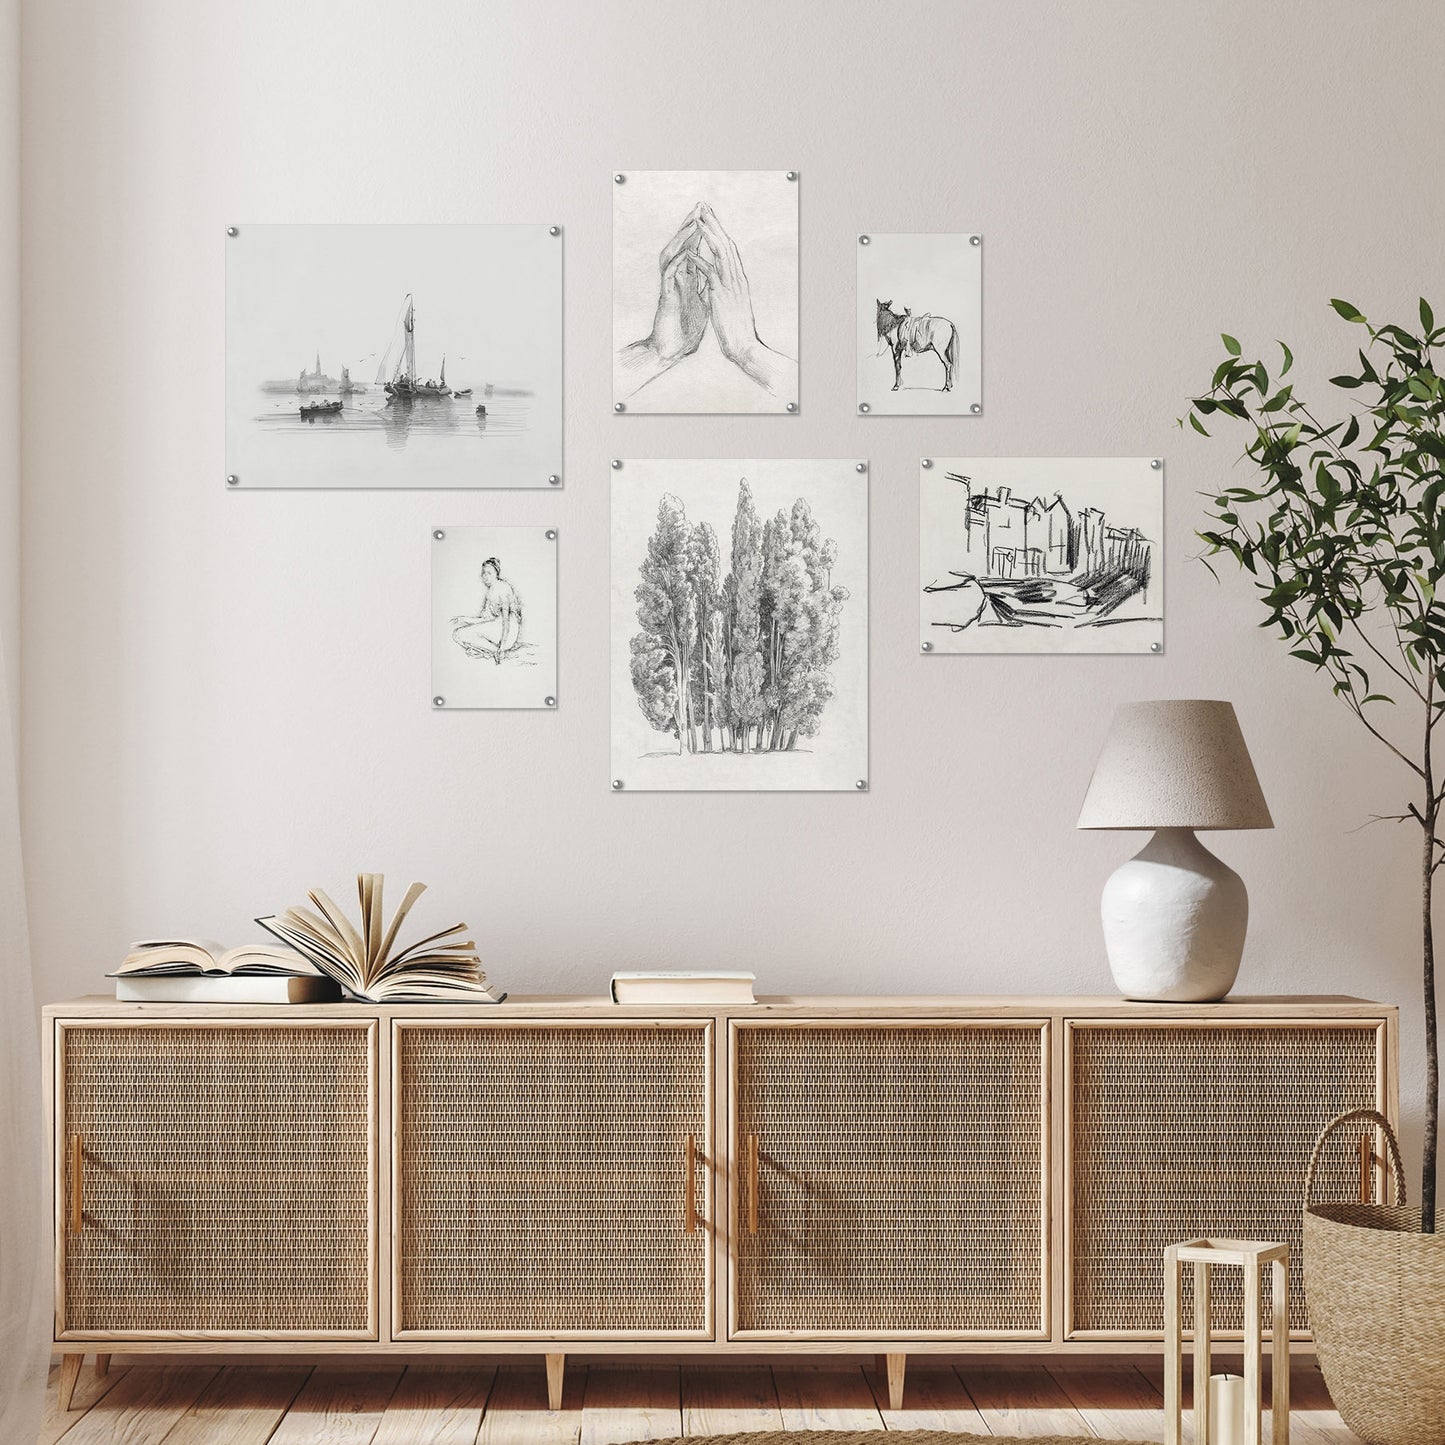 6 Piece Vintage Gallery Wall Art Set Poster - Whispered Canvases Art by Maple + Oak - Prints